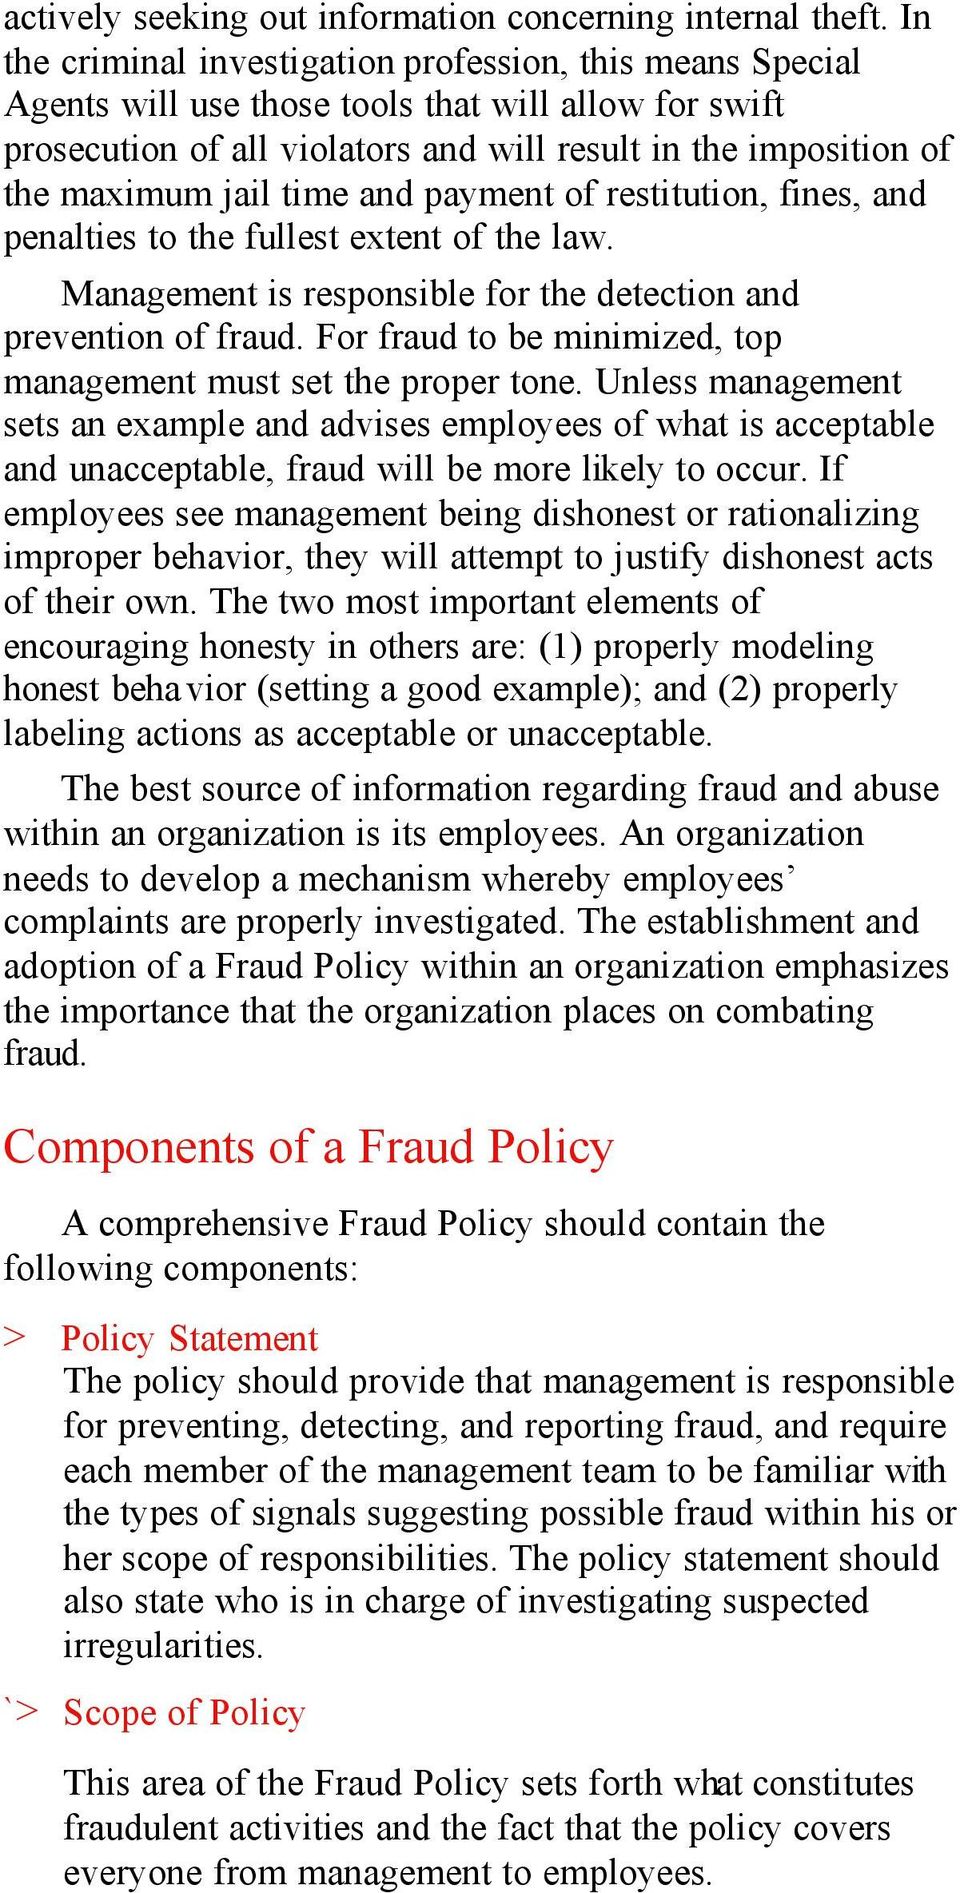 time and payment of restitution, fines, and penalties to the fullest extent of the law. Management is responsible for the detection and prevention of fraud.